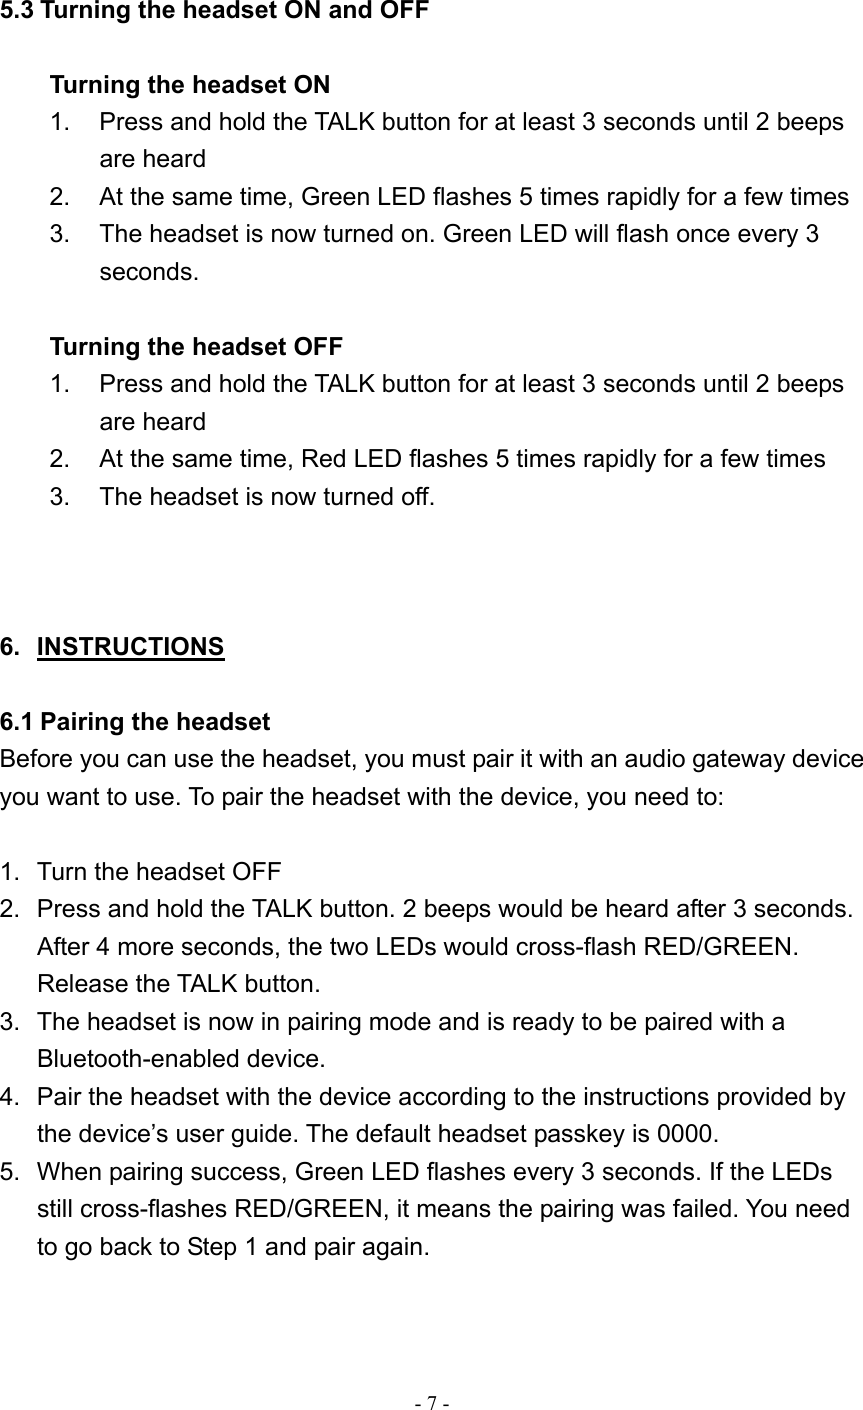  - 7 -  5.3 Turning the headset ON and OFF  Turning the headset ON 1.  Press and hold the TALK button for at least 3 seconds until 2 beeps are heard 2.  At the same time, Green LED flashes 5 times rapidly for a few times 3.  The headset is now turned on. Green LED will flash once every 3 seconds.   Turning the headset OFF 1.  Press and hold the TALK button for at least 3 seconds until 2 beeps are heard 2.  At the same time, Red LED flashes 5 times rapidly for a few times 3.  The headset is now turned off.    6. INSTRUCTIONS  6.1 Pairing the headset Before you can use the headset, you must pair it with an audio gateway device you want to use. To pair the headset with the device, you need to:  1.  Turn the headset OFF 2.  Press and hold the TALK button. 2 beeps would be heard after 3 seconds. After 4 more seconds, the two LEDs would cross-flash RED/GREEN. Release the TALK button. 3.  The headset is now in pairing mode and is ready to be paired with a Bluetooth-enabled device. 4.  Pair the headset with the device according to the instructions provided by the device’s user guide. The default headset passkey is 0000. 5.  When pairing success, Green LED flashes every 3 seconds. If the LEDs still cross-flashes RED/GREEN, it means the pairing was failed. You need to go back to Step 1 and pair again.   